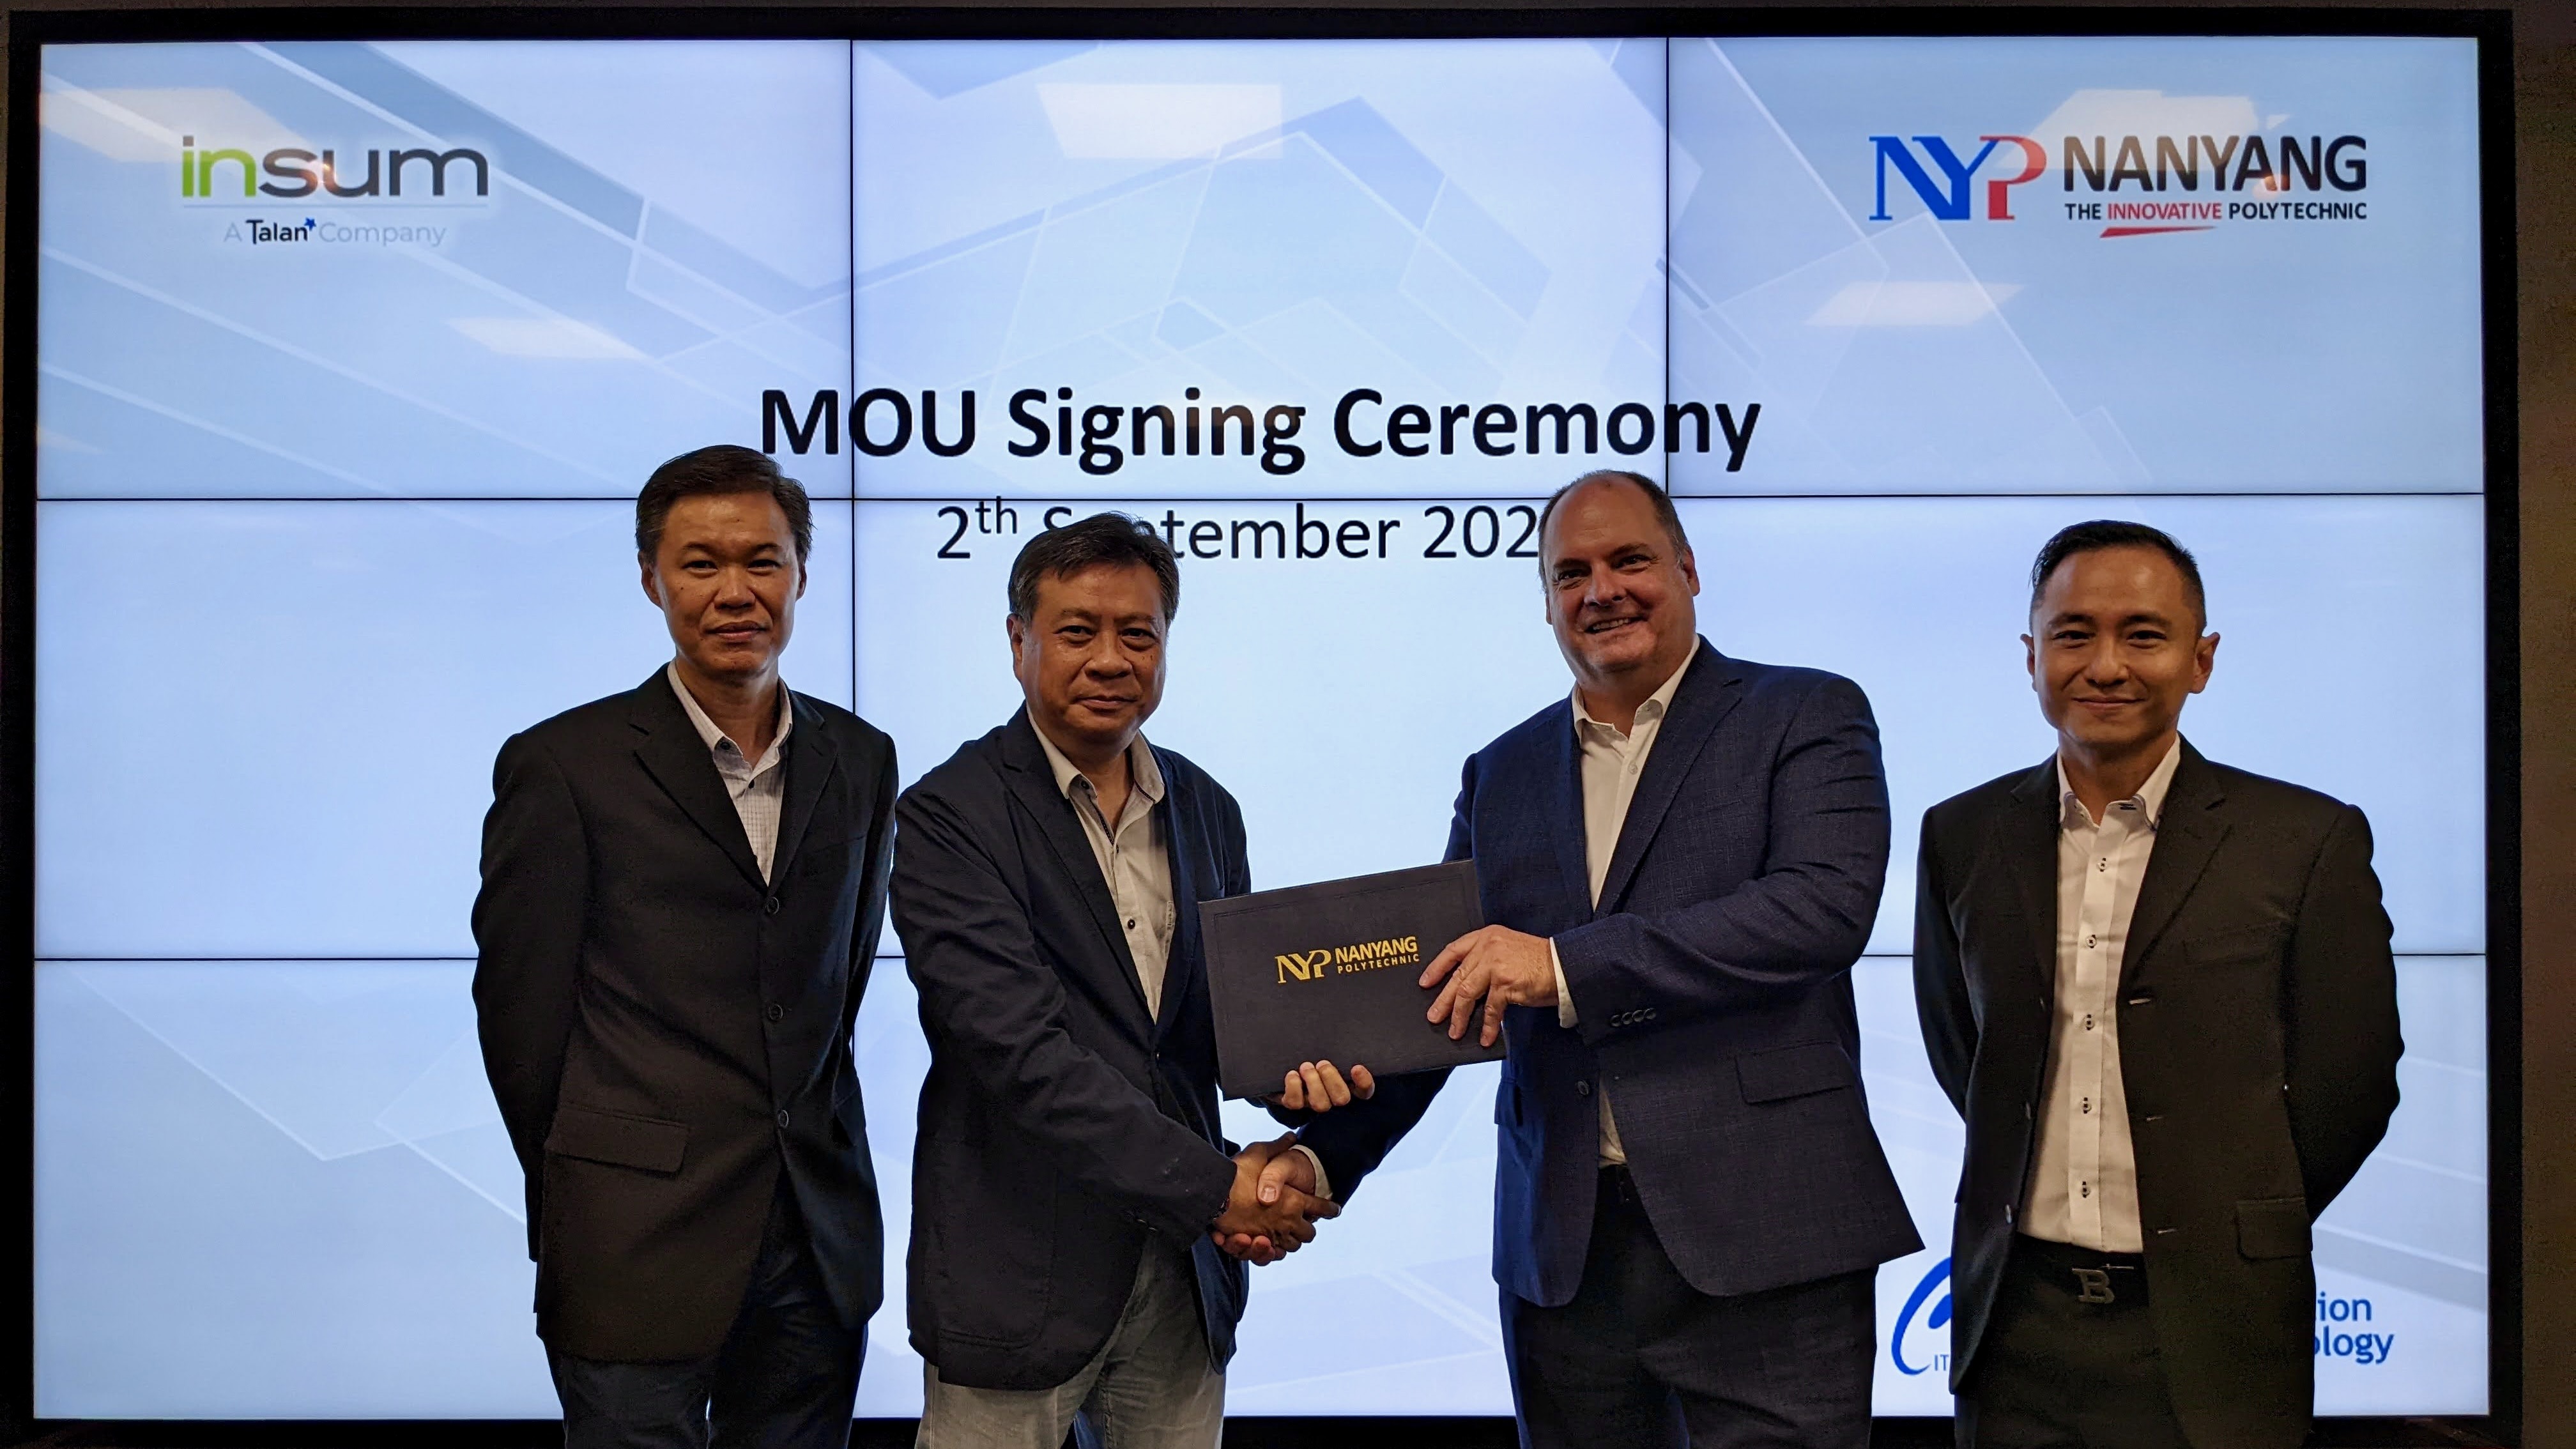 MoU signed between NYP and Insum